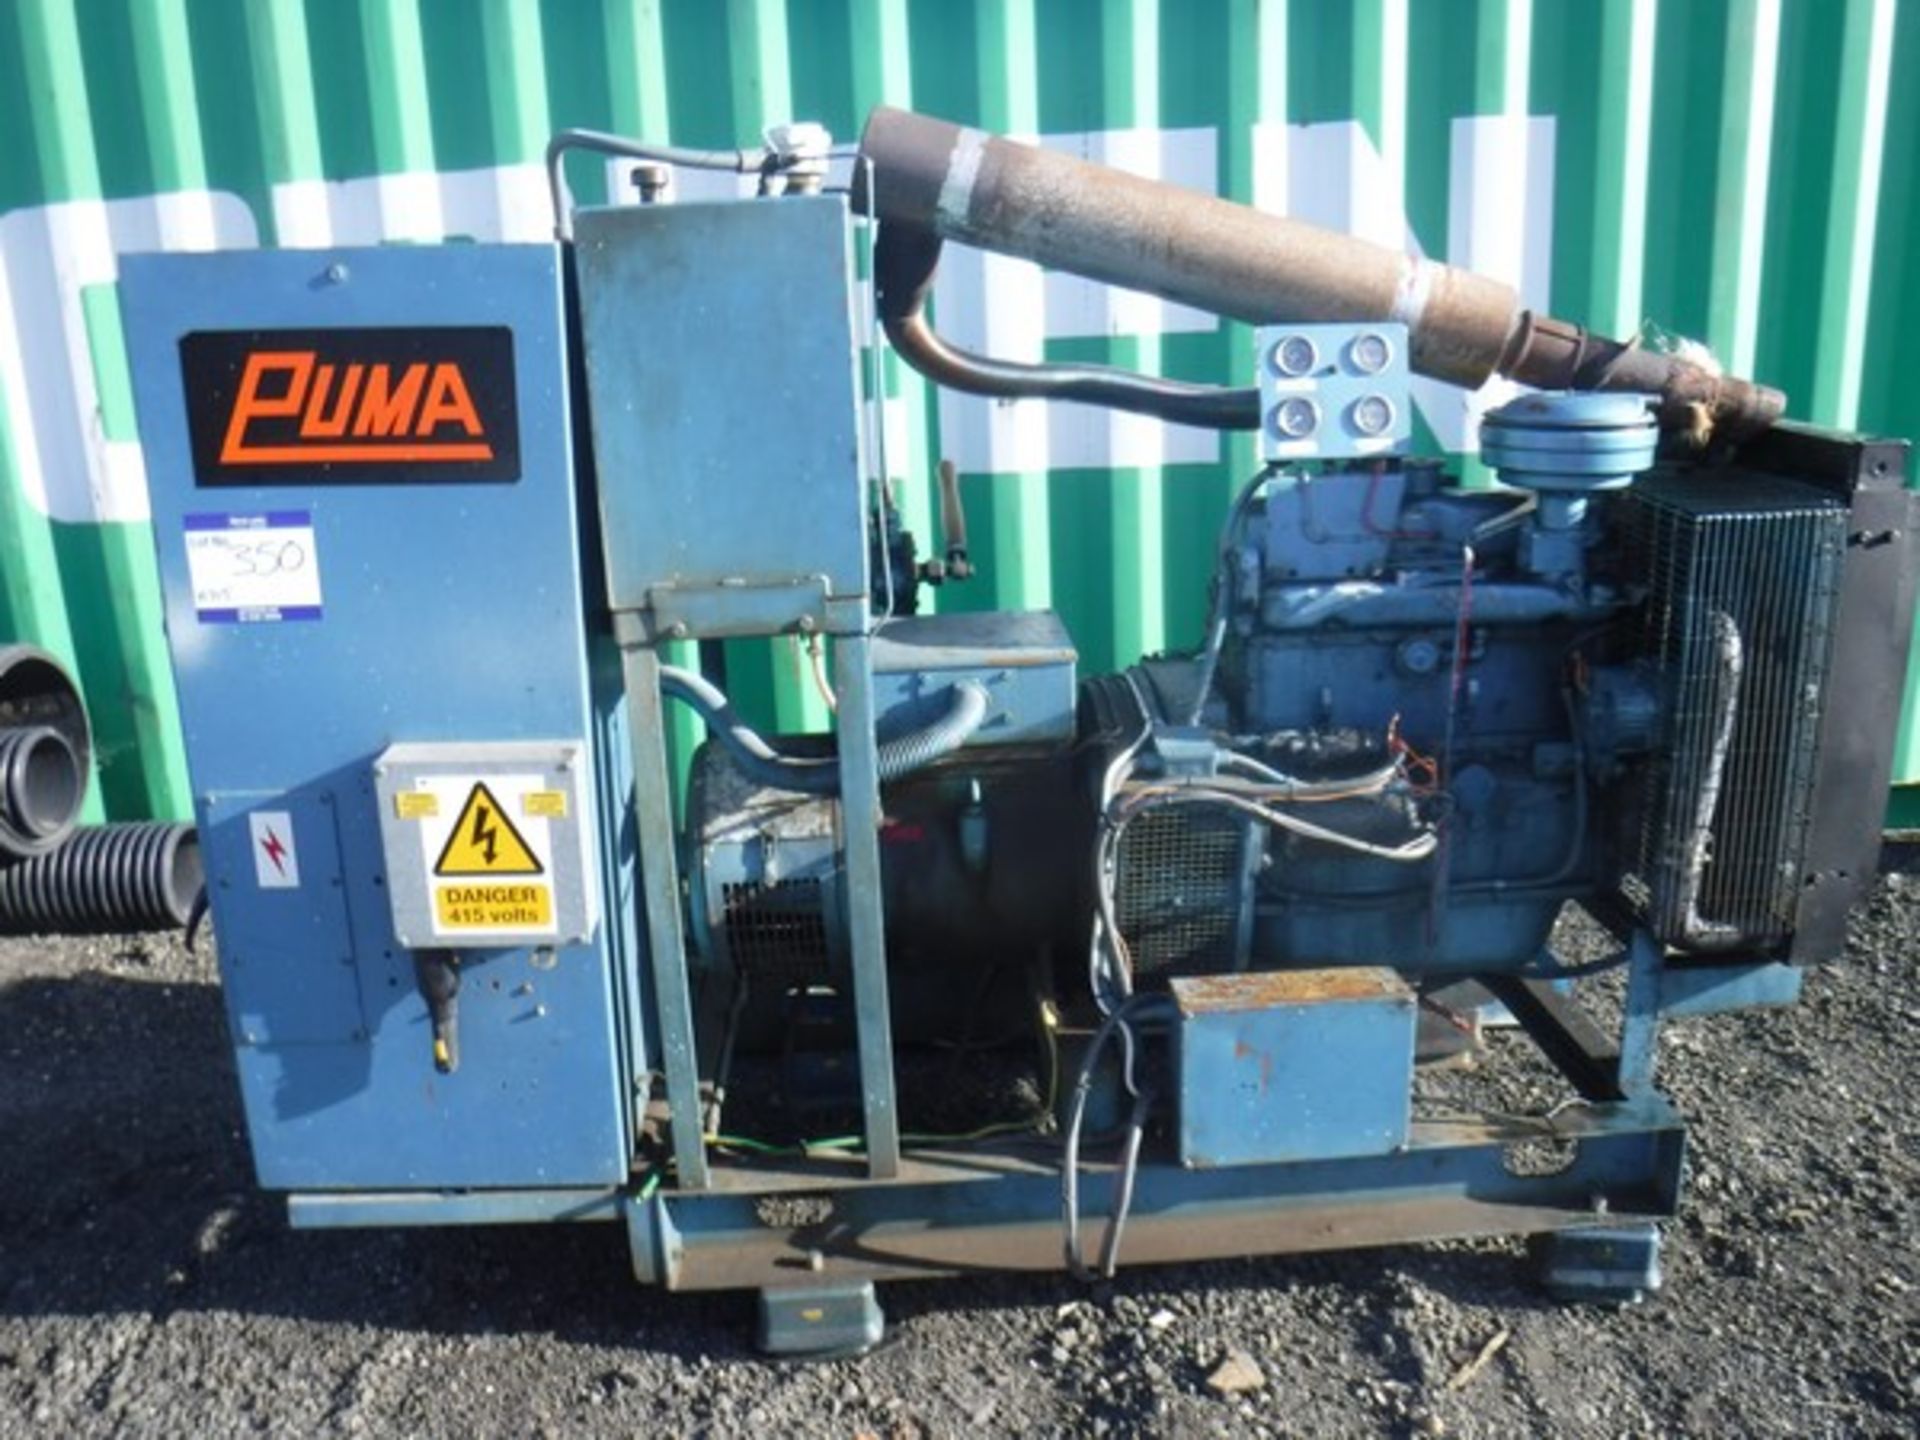 PUMA generator s/n 10112/1,rating 35kva,amps 49, 415/240v,HZ 50, Phase 3 rpm 1500. Bedford A043A100